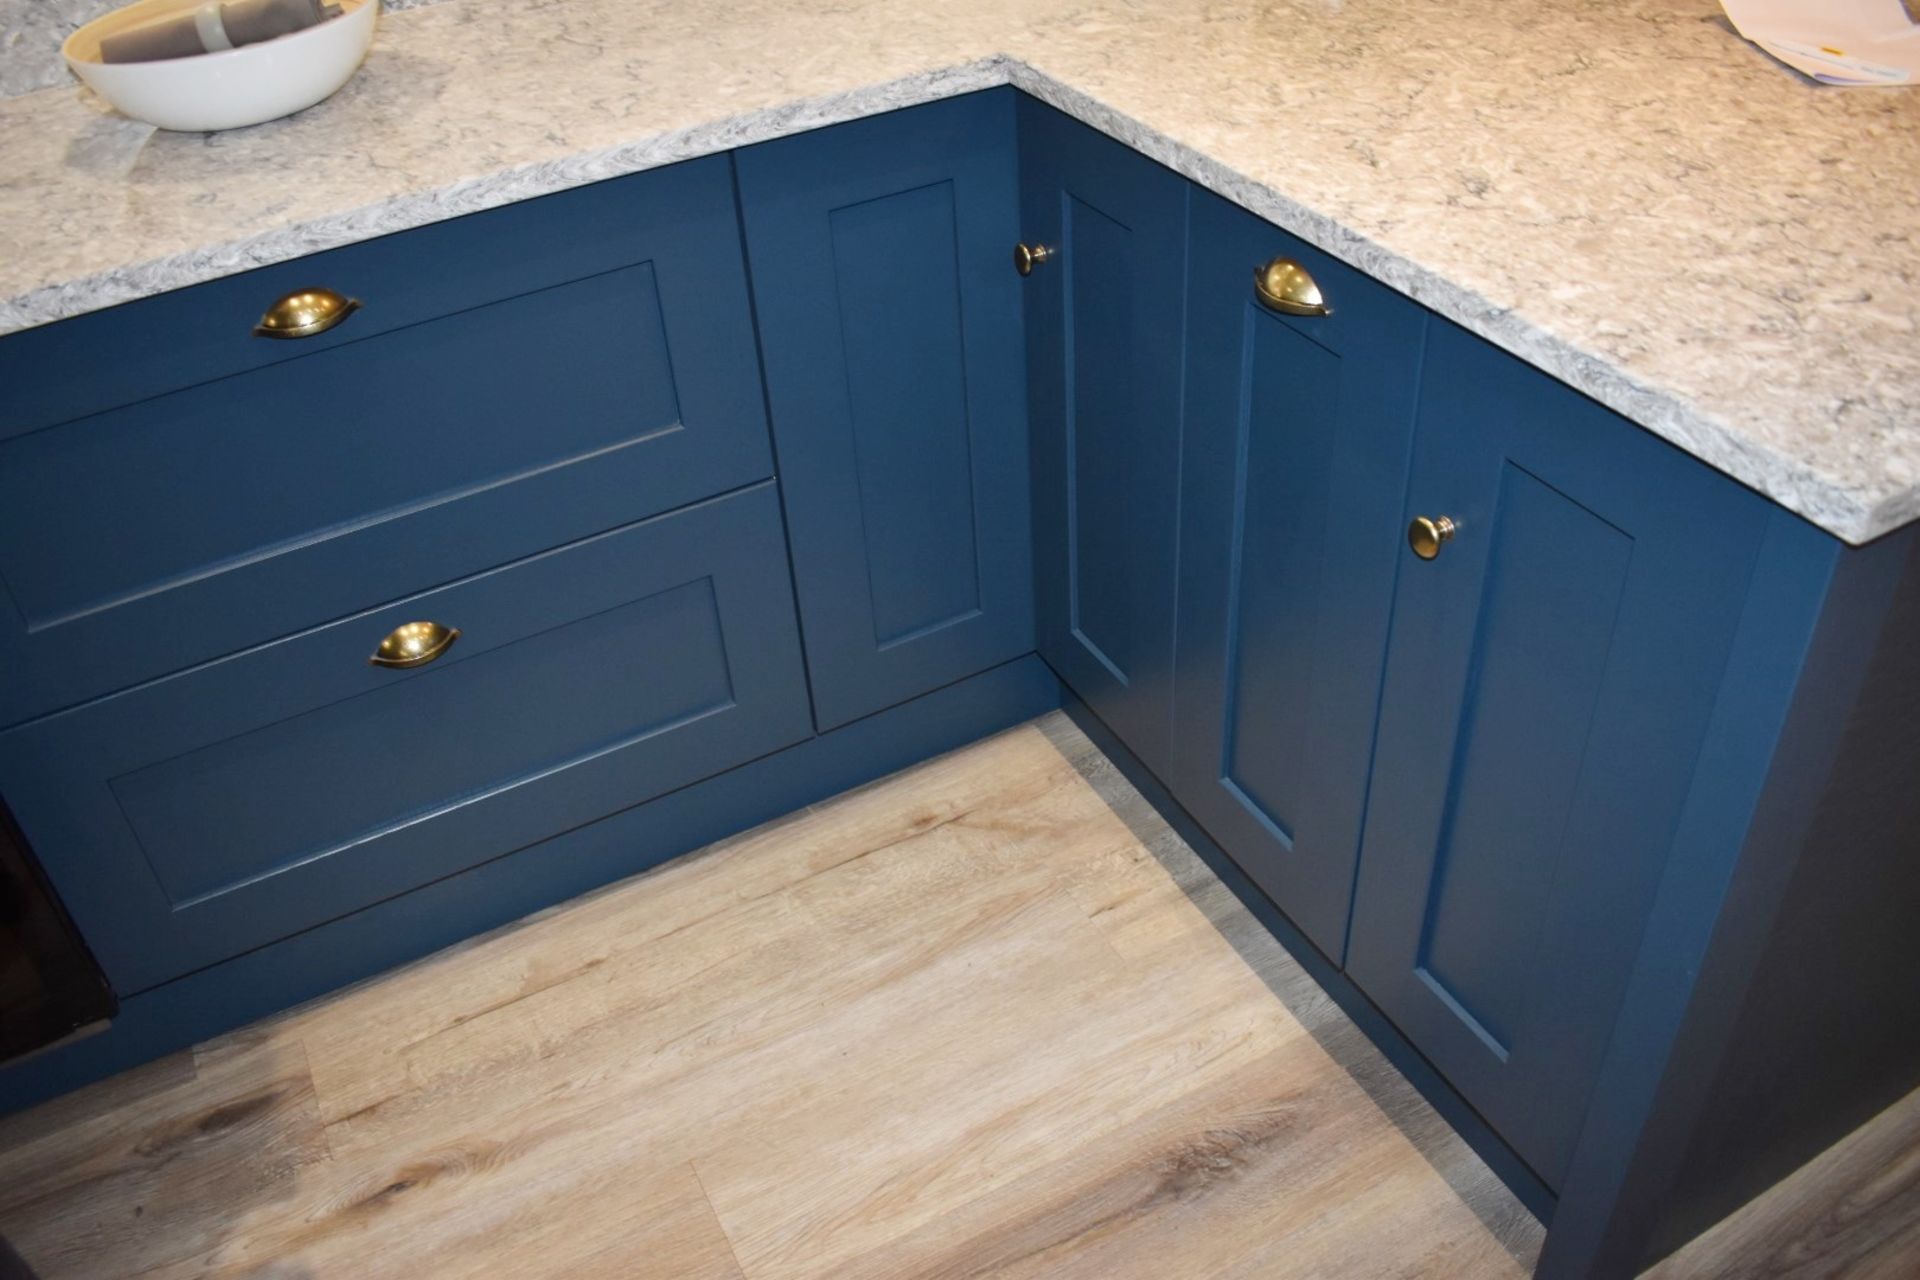 1 x 'Mornington' Shaker-style Feature-rich Fitted Kitchen in Blue, with Premium Branded Appliances - Bild 63 aus 67